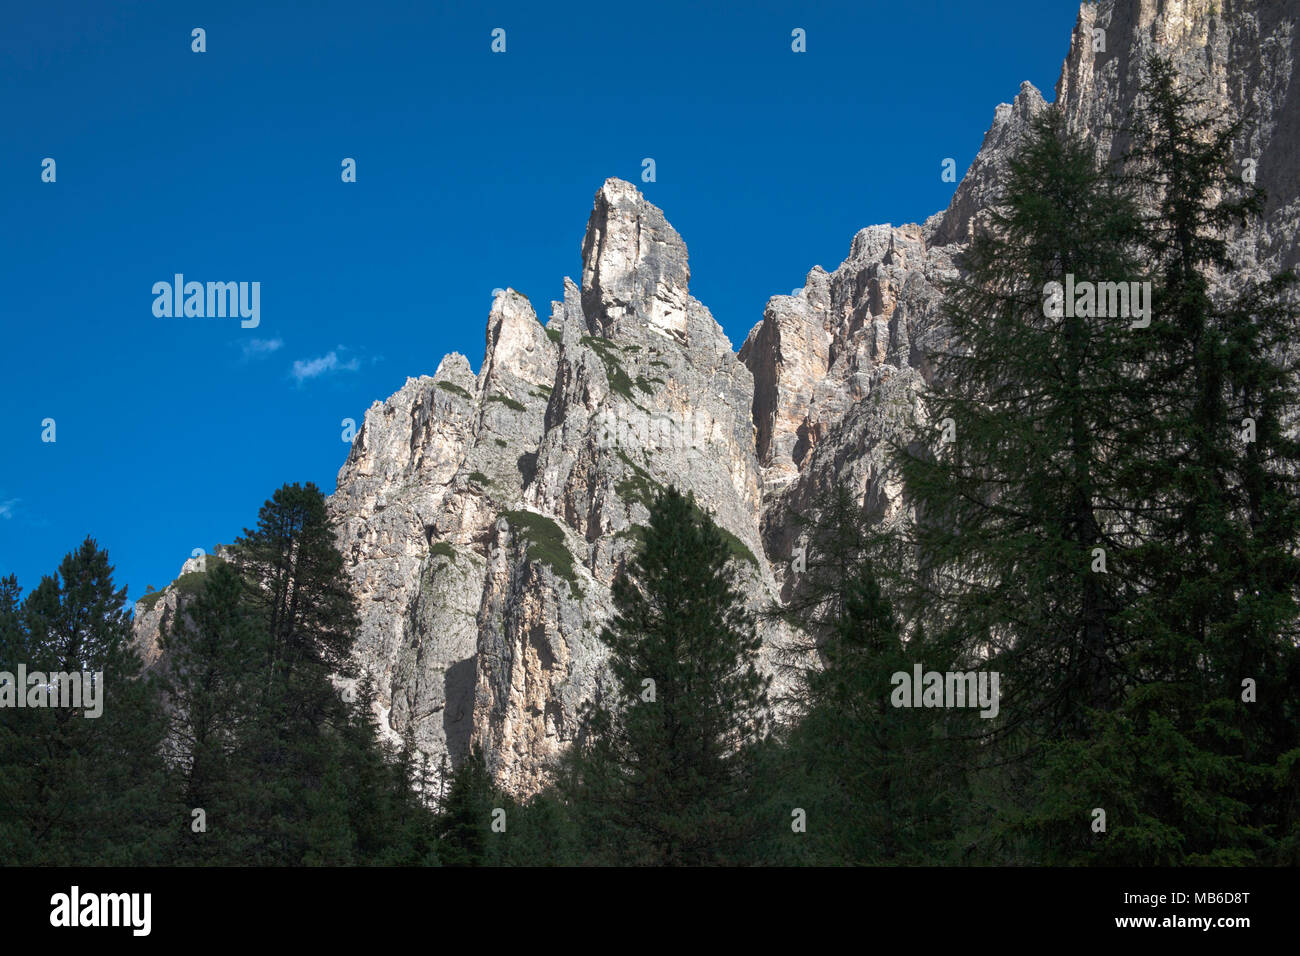 The Ciastel de Chedul an out crop of Monte de Seura rising above the Langental Selva Val Gardena Dolomites Italy Stock Photo